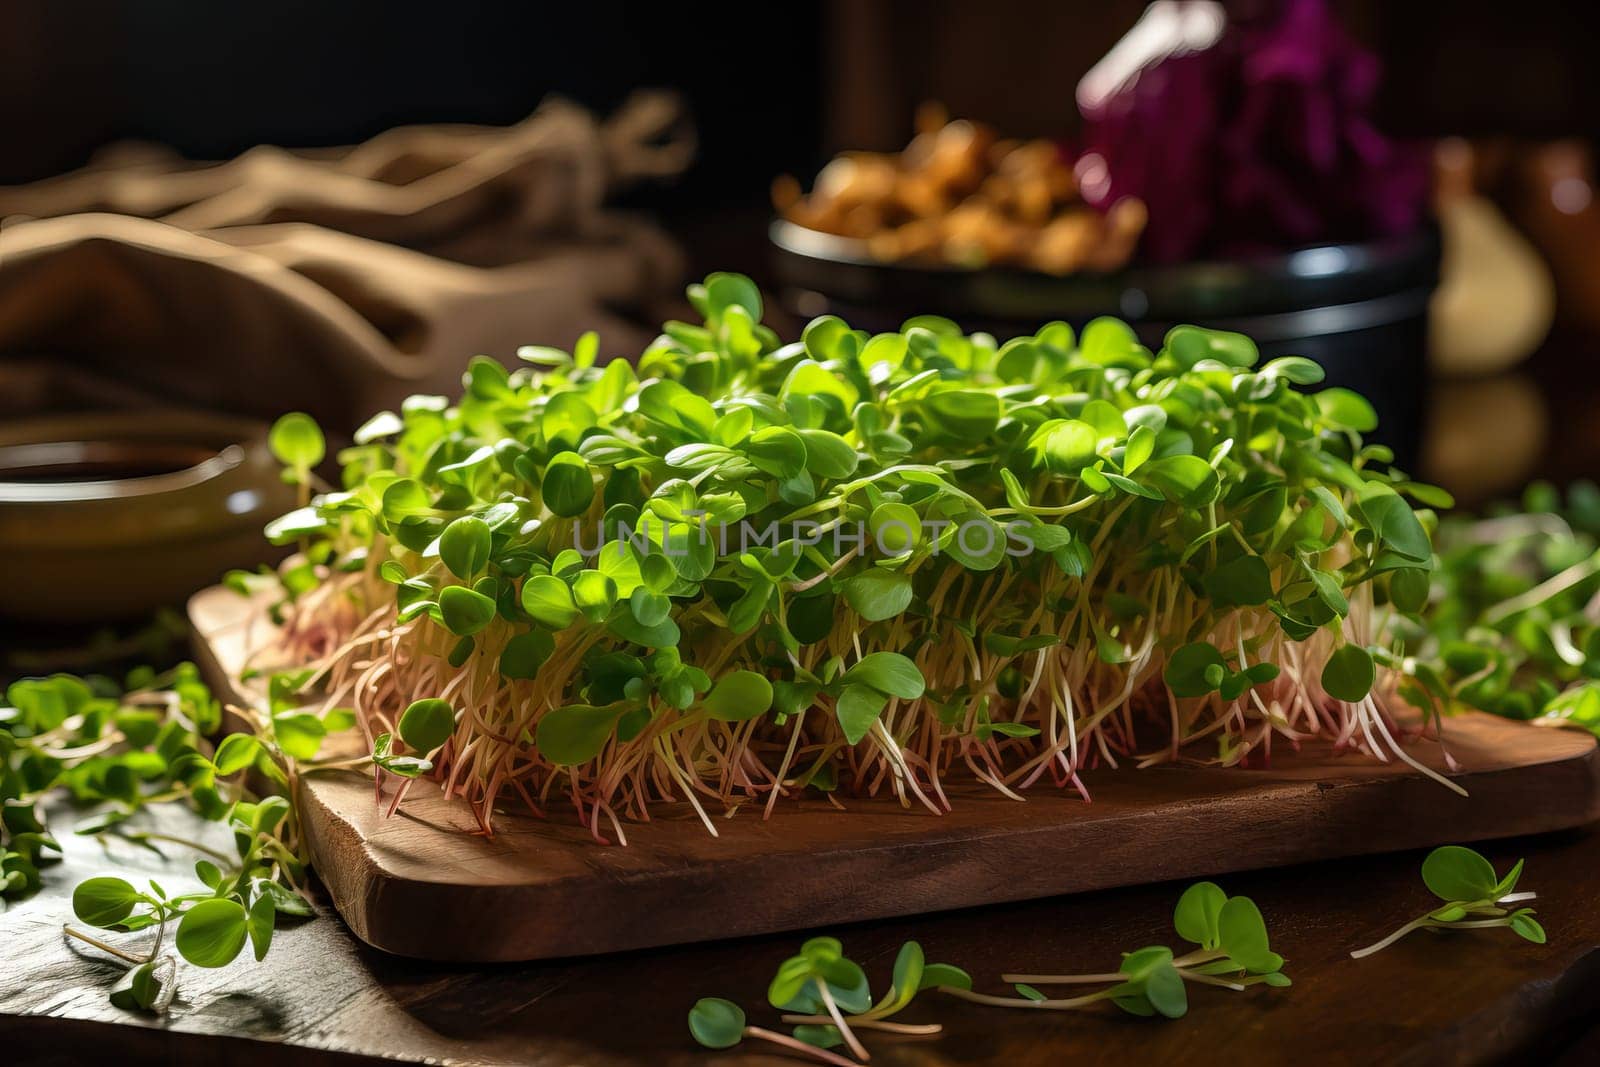 Useful microgreens on the table in the kitchen, growing microgreens at home.